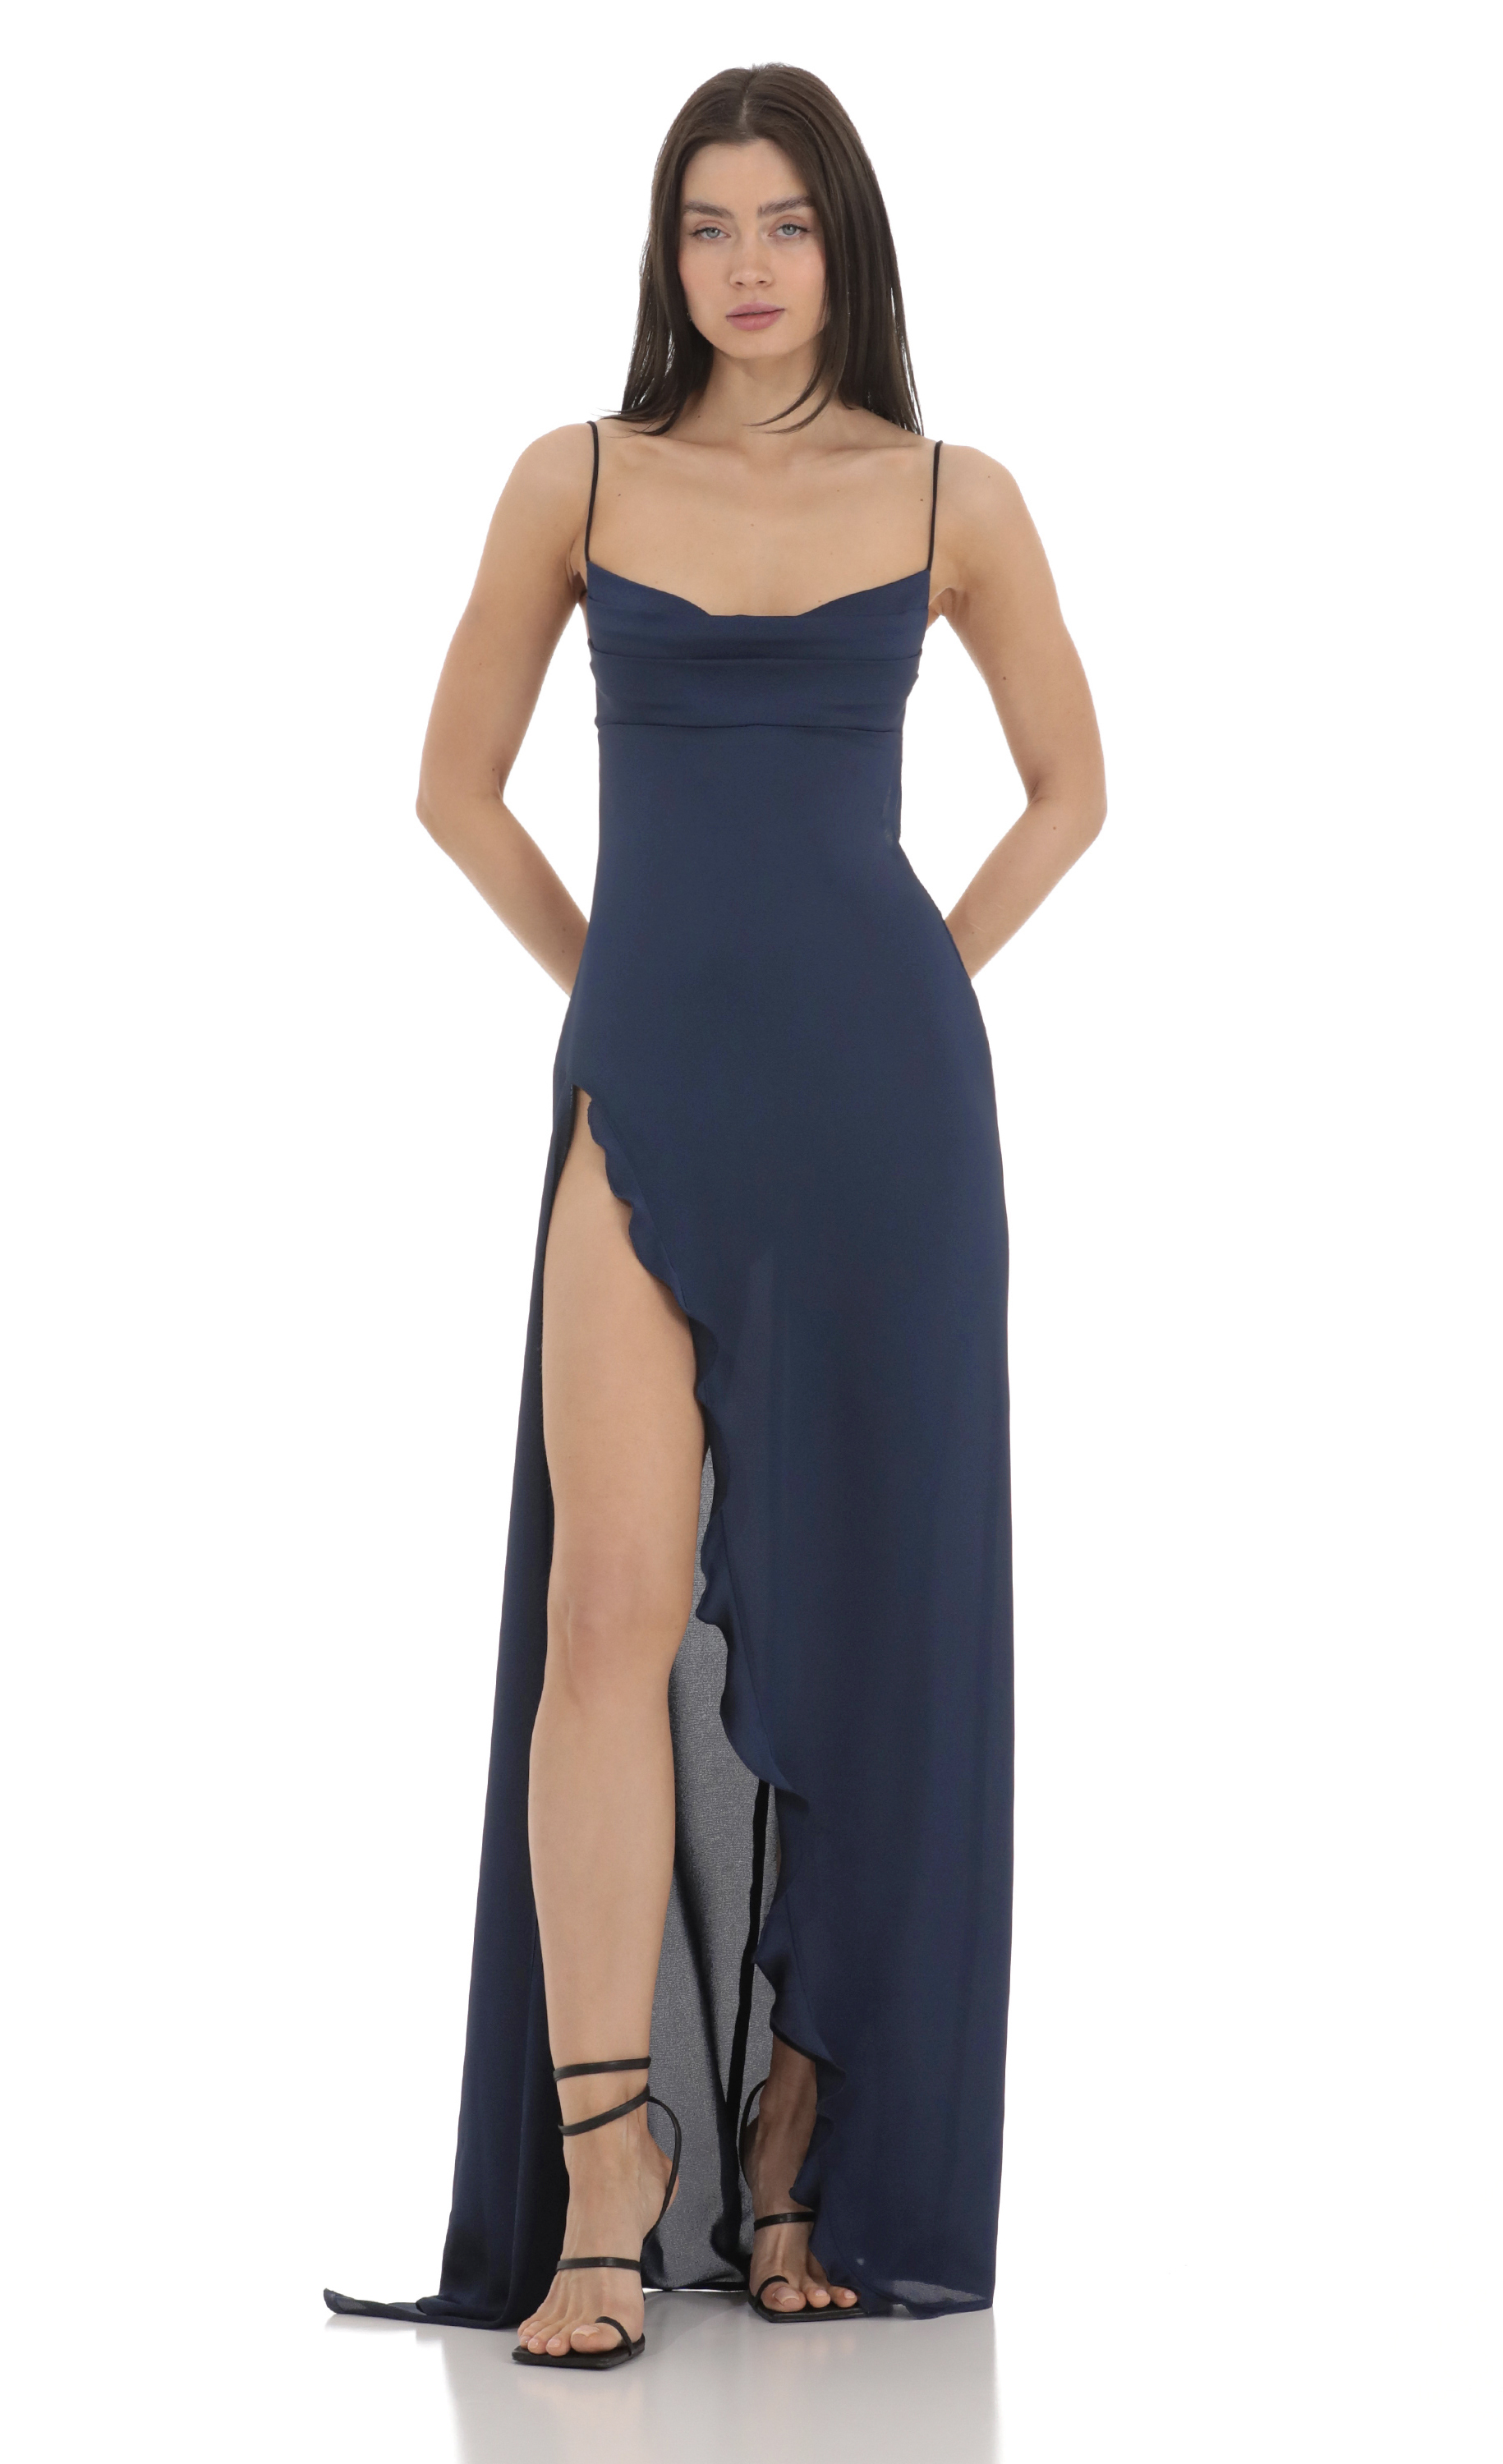 Cowl Neck Satin Open Back Maxi Dress in Navy